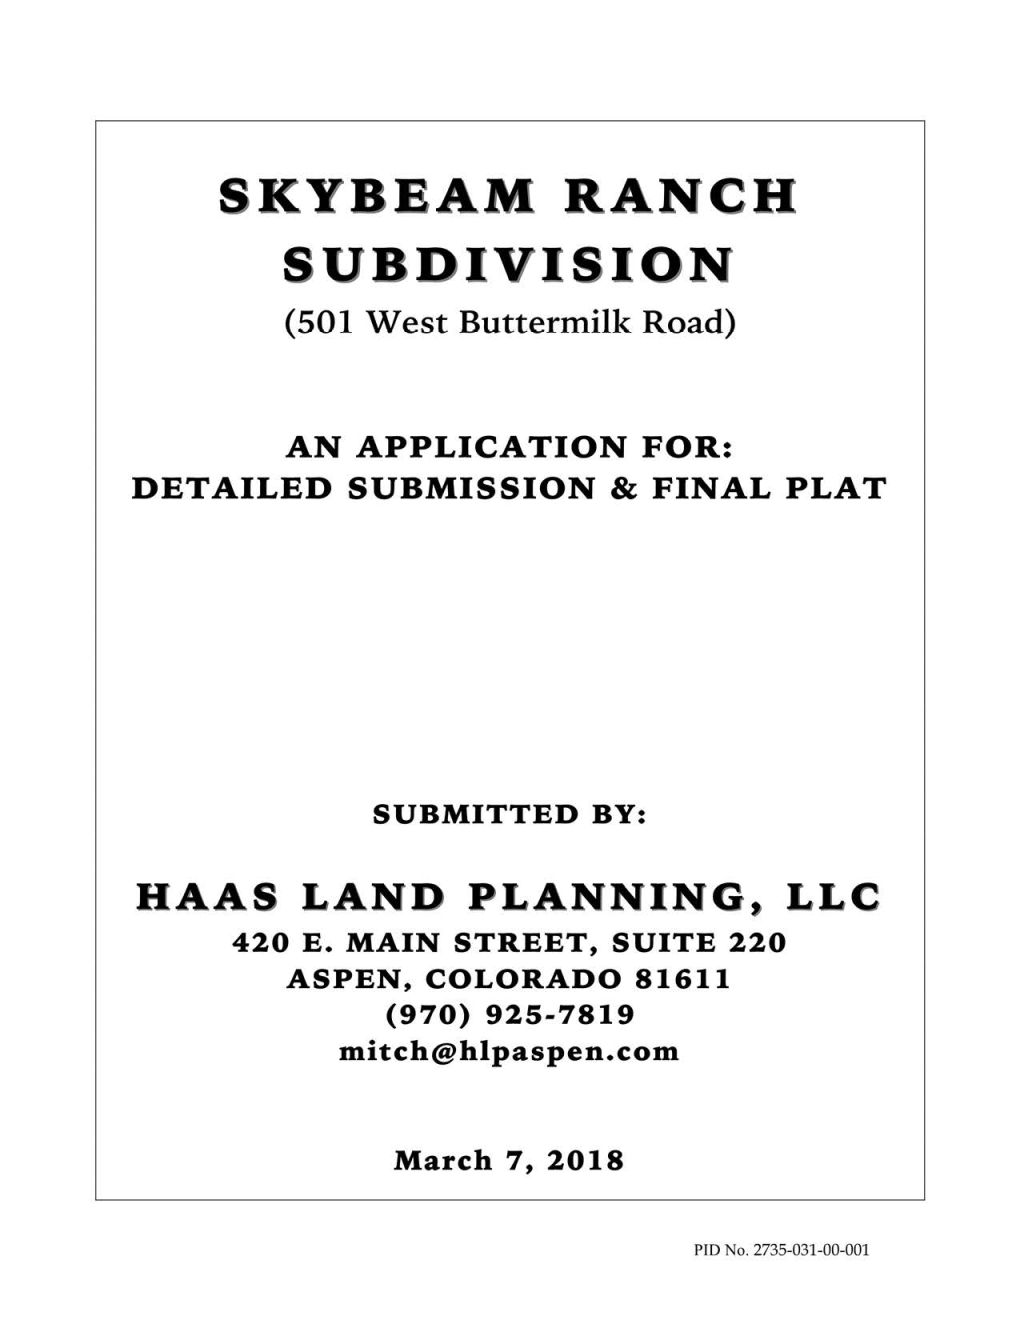 SKYBEAM RANCH SUBDIVISION (501 West Buttermilk Road)